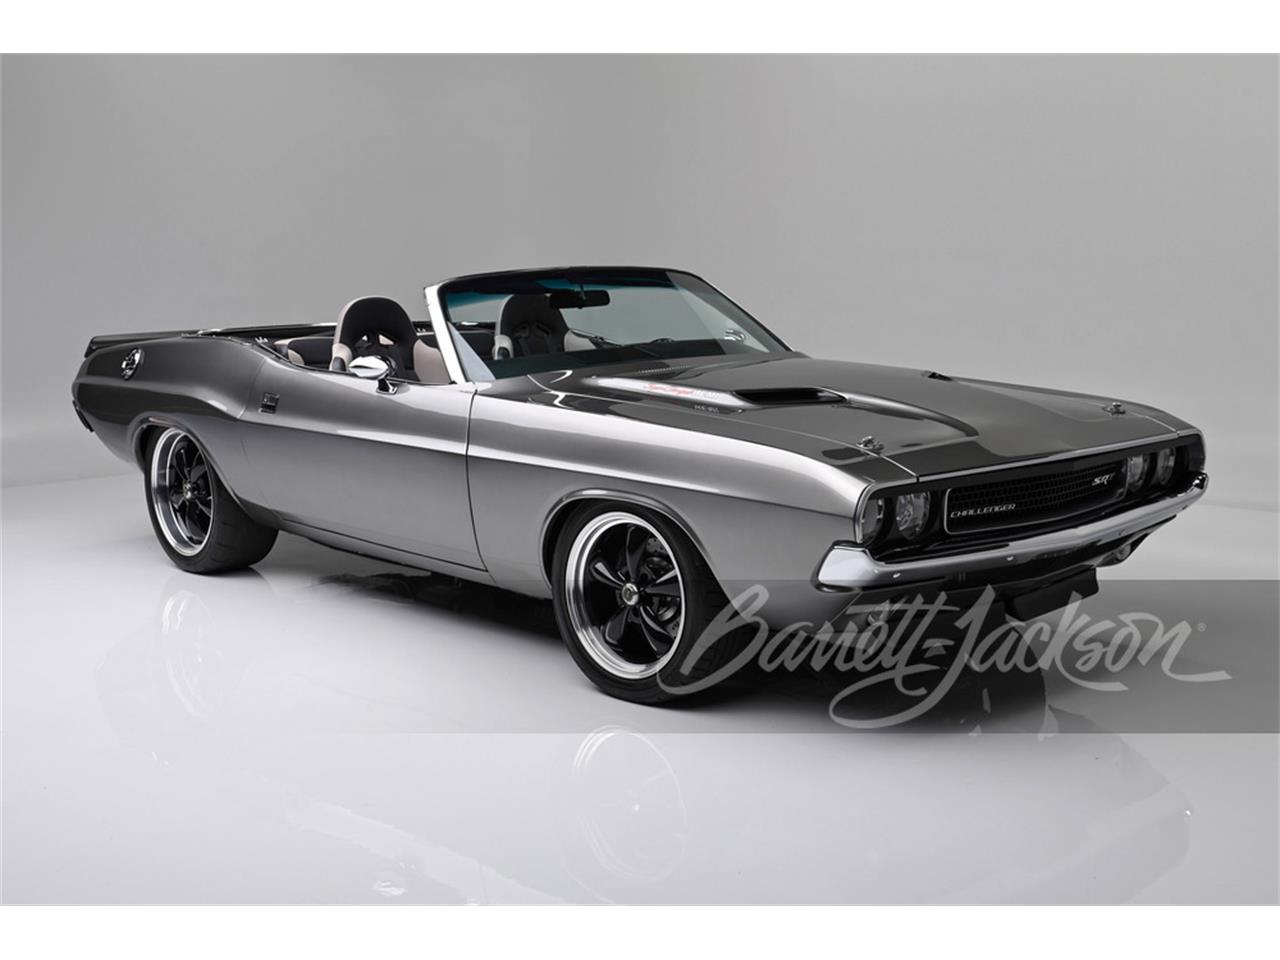 For Sale at Auction: 1970 Dodge Challenger in Scottsdale, Arizona for sale in Scottsdale, AZ